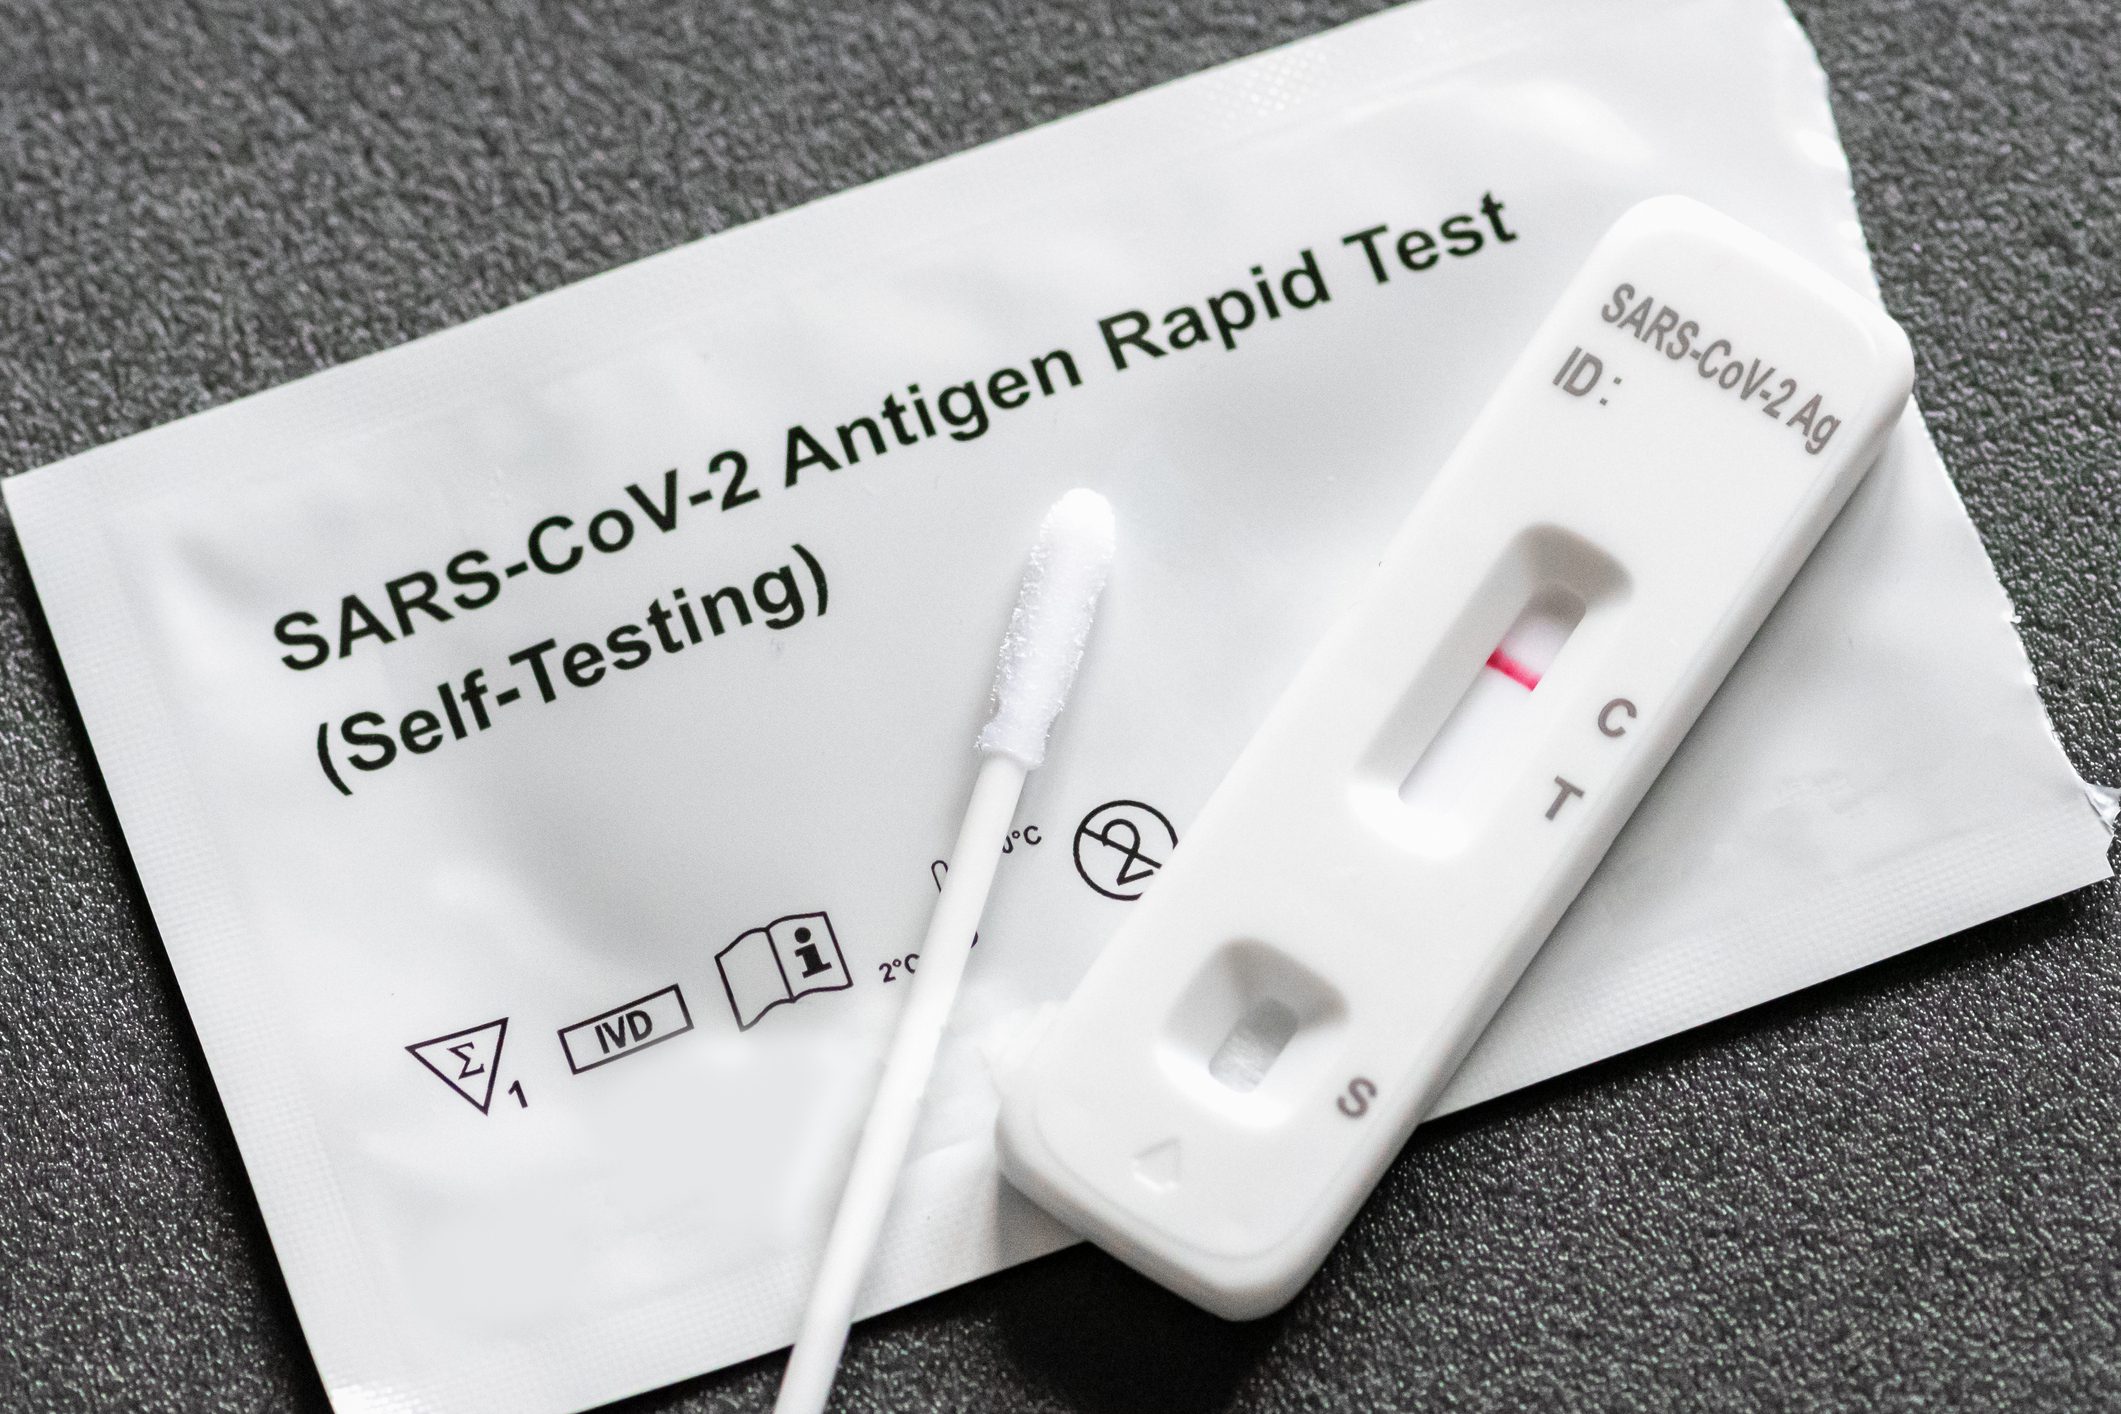 The Biden administration announced that they would be purchasing another 500 million at-home COVID tests for Americans.